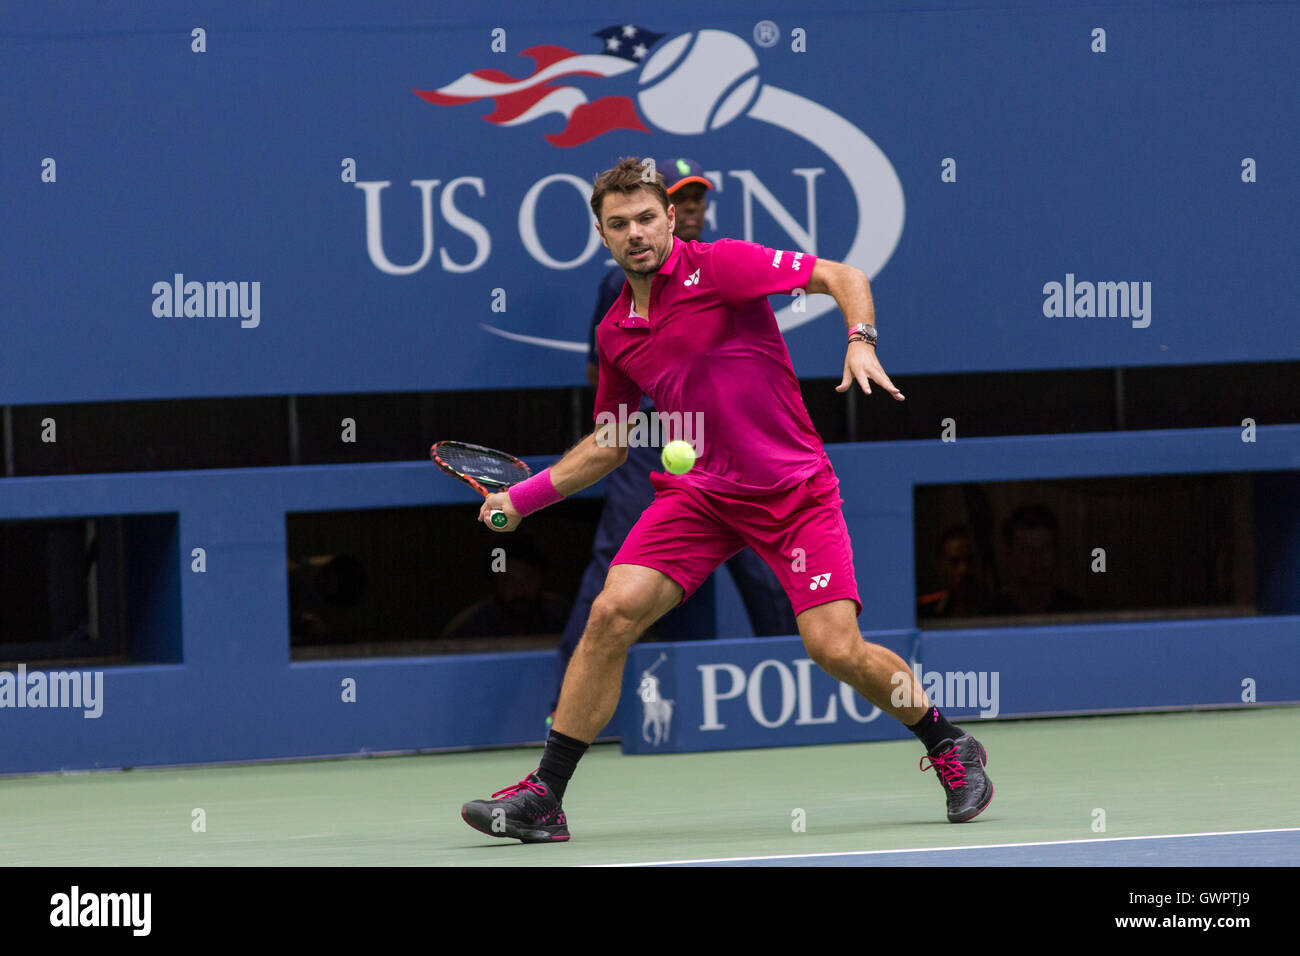 Stan Wawrinka (SUI) competing in the 2016 US Open Men's Final Stock Photo